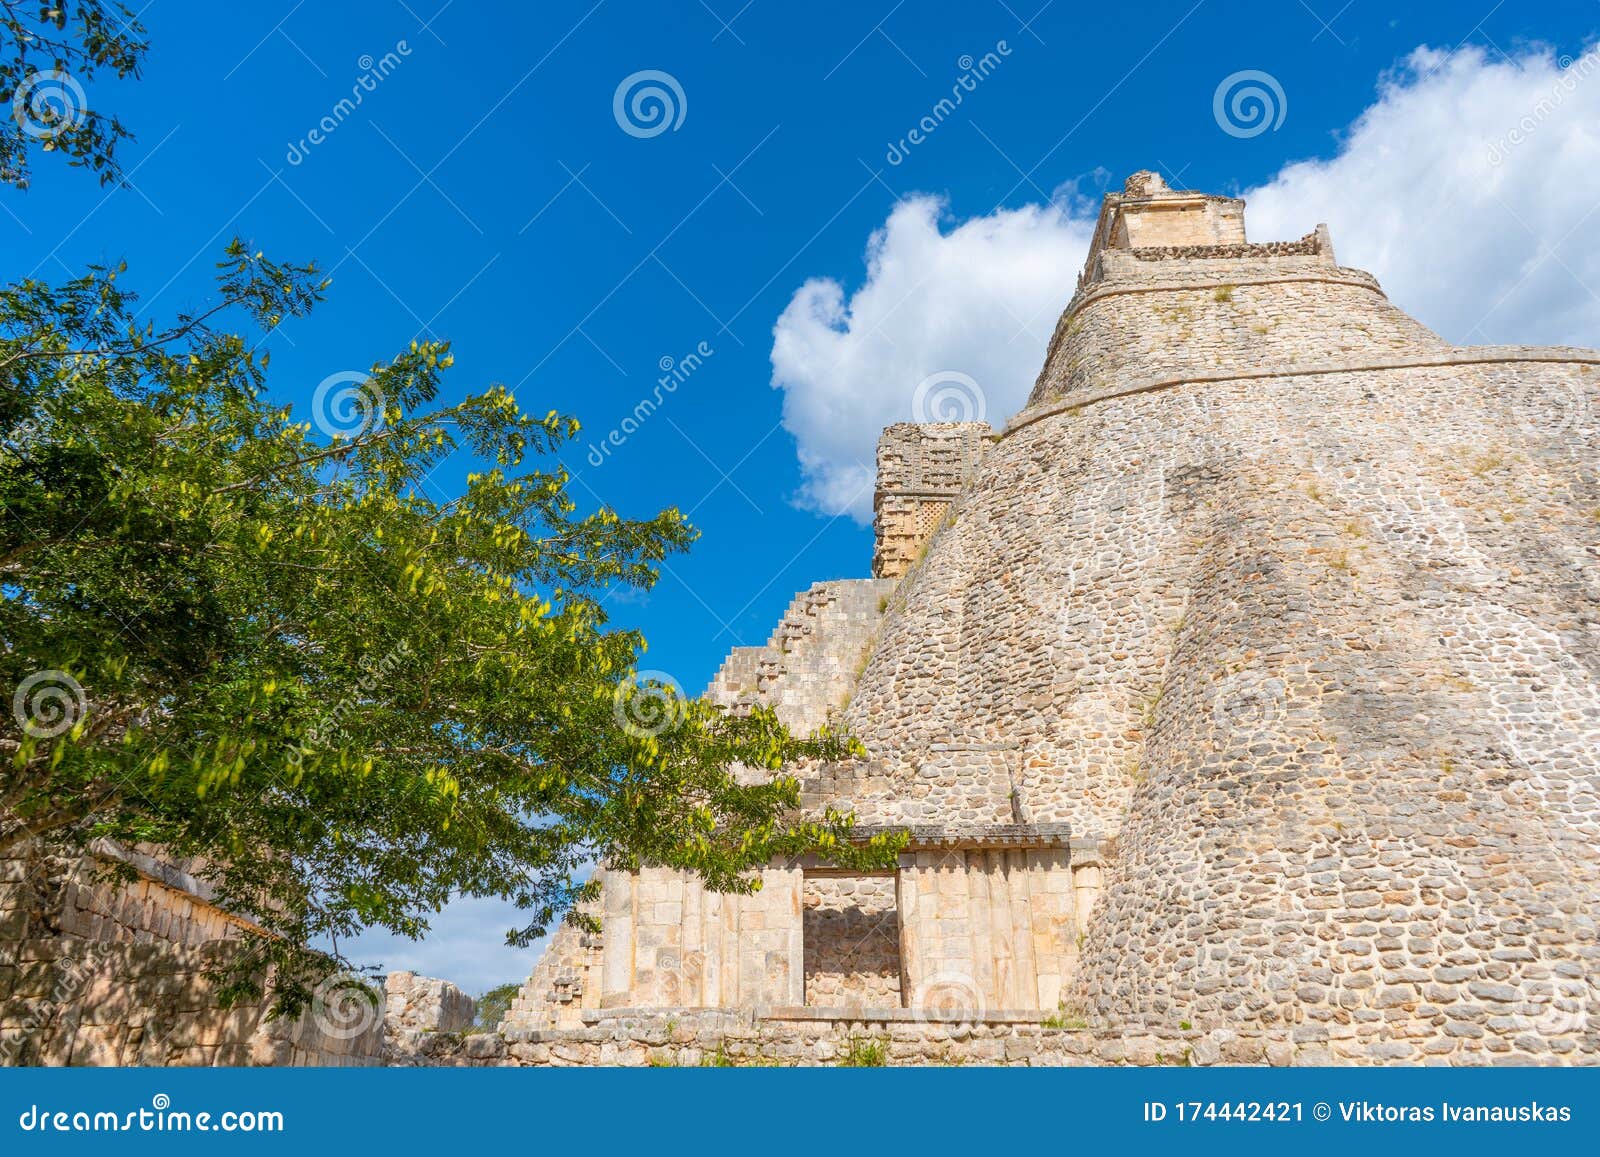 the adivino the pyramid of the magician or the pyramid of the dwarf. uxmal an ancient maya city of the classical period. travel